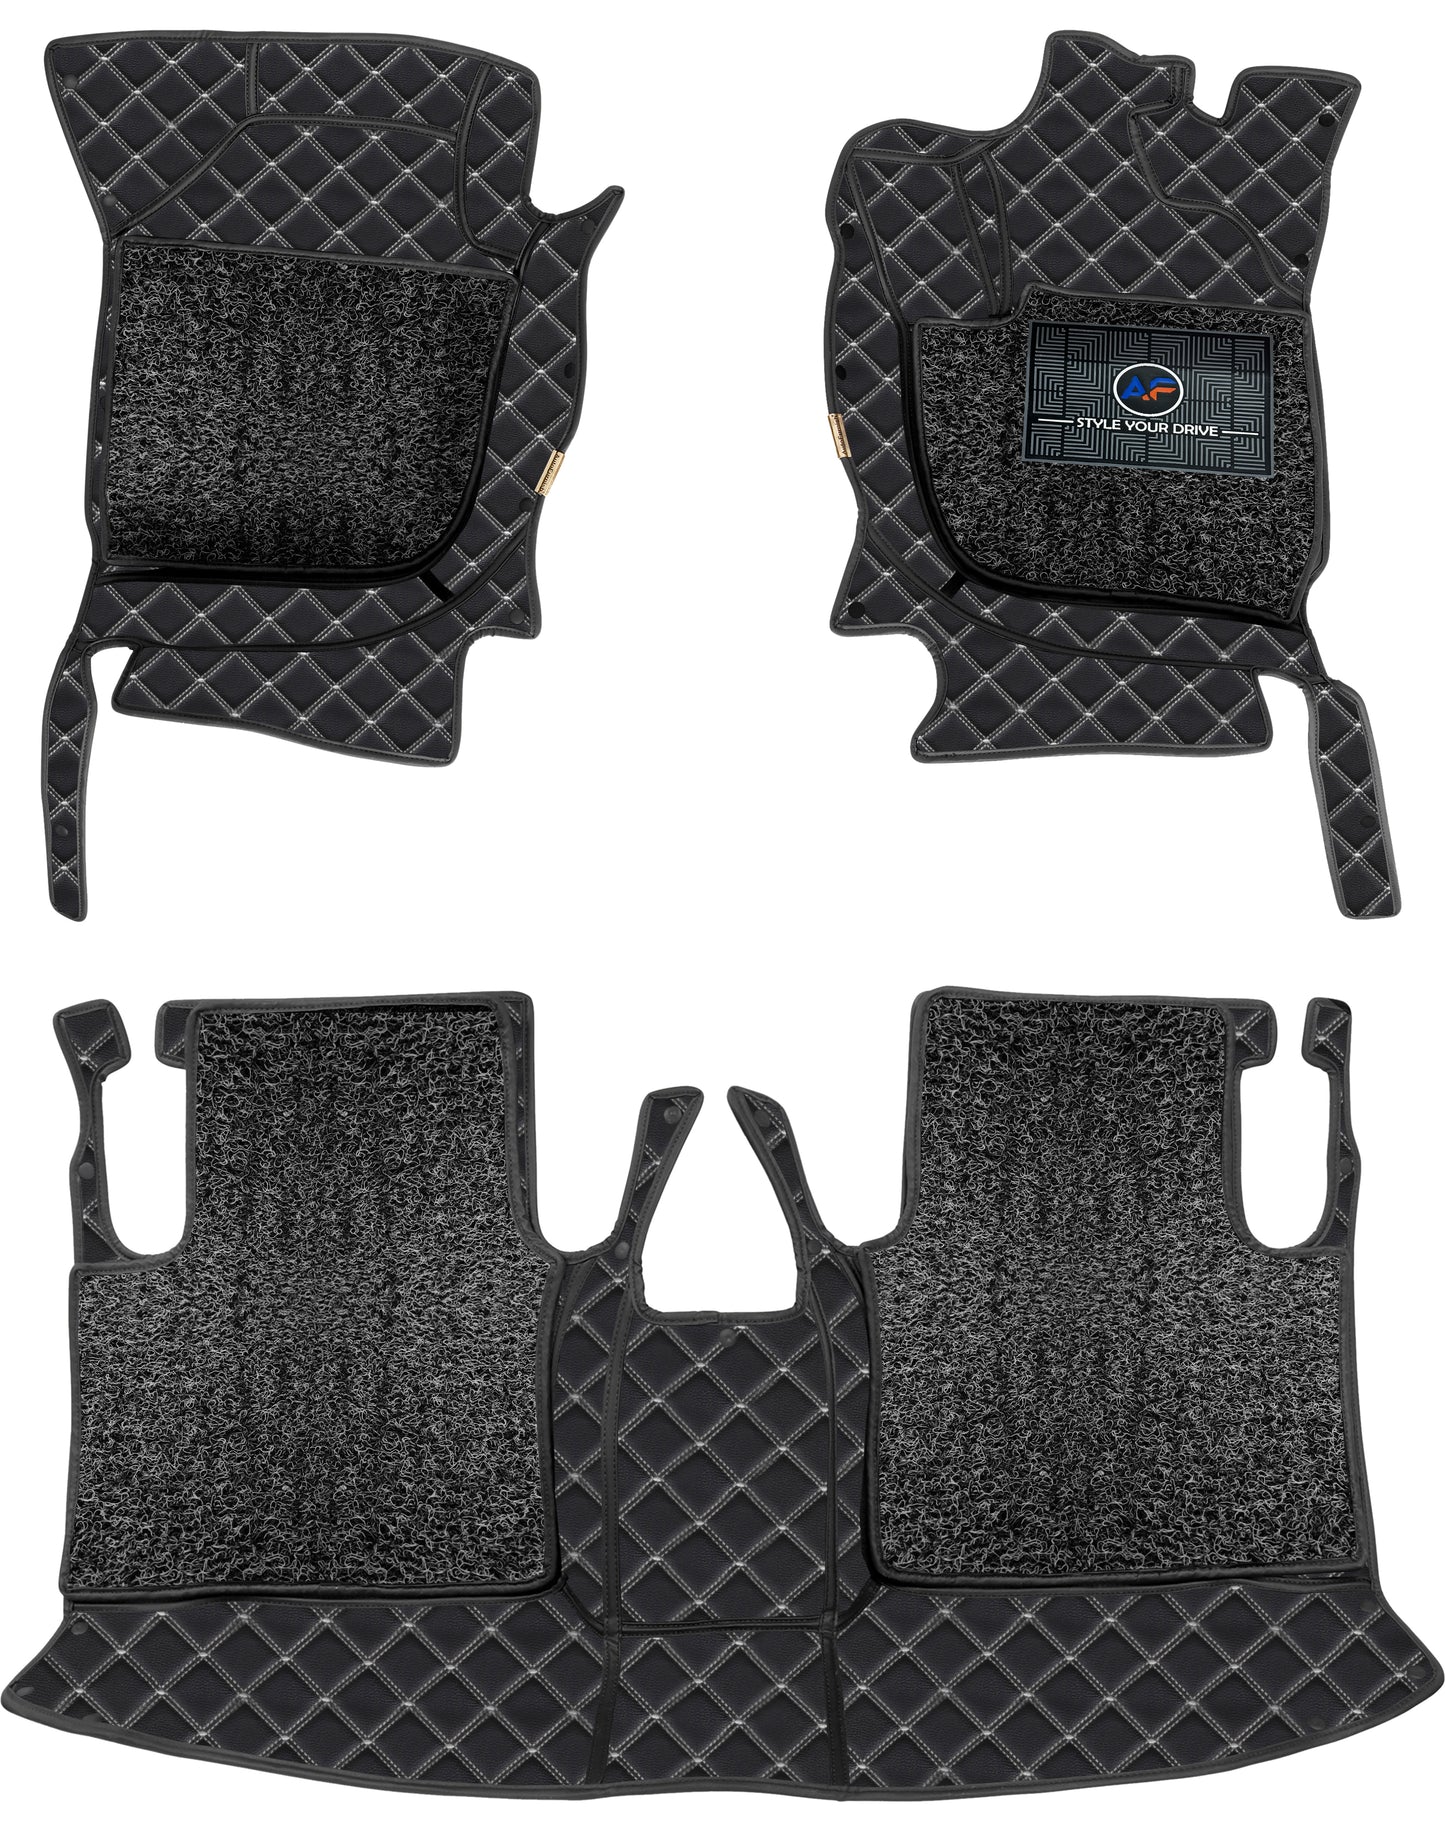 KIA Carnival Limousine (7 Seater) 2020 7D Luxury Car Mat, All Weather Proof, Anti-Skid, 100% Waterproof & Odorless with Unique Diamond Fish Design (24mm Luxury PU Leather, 2 Rows)